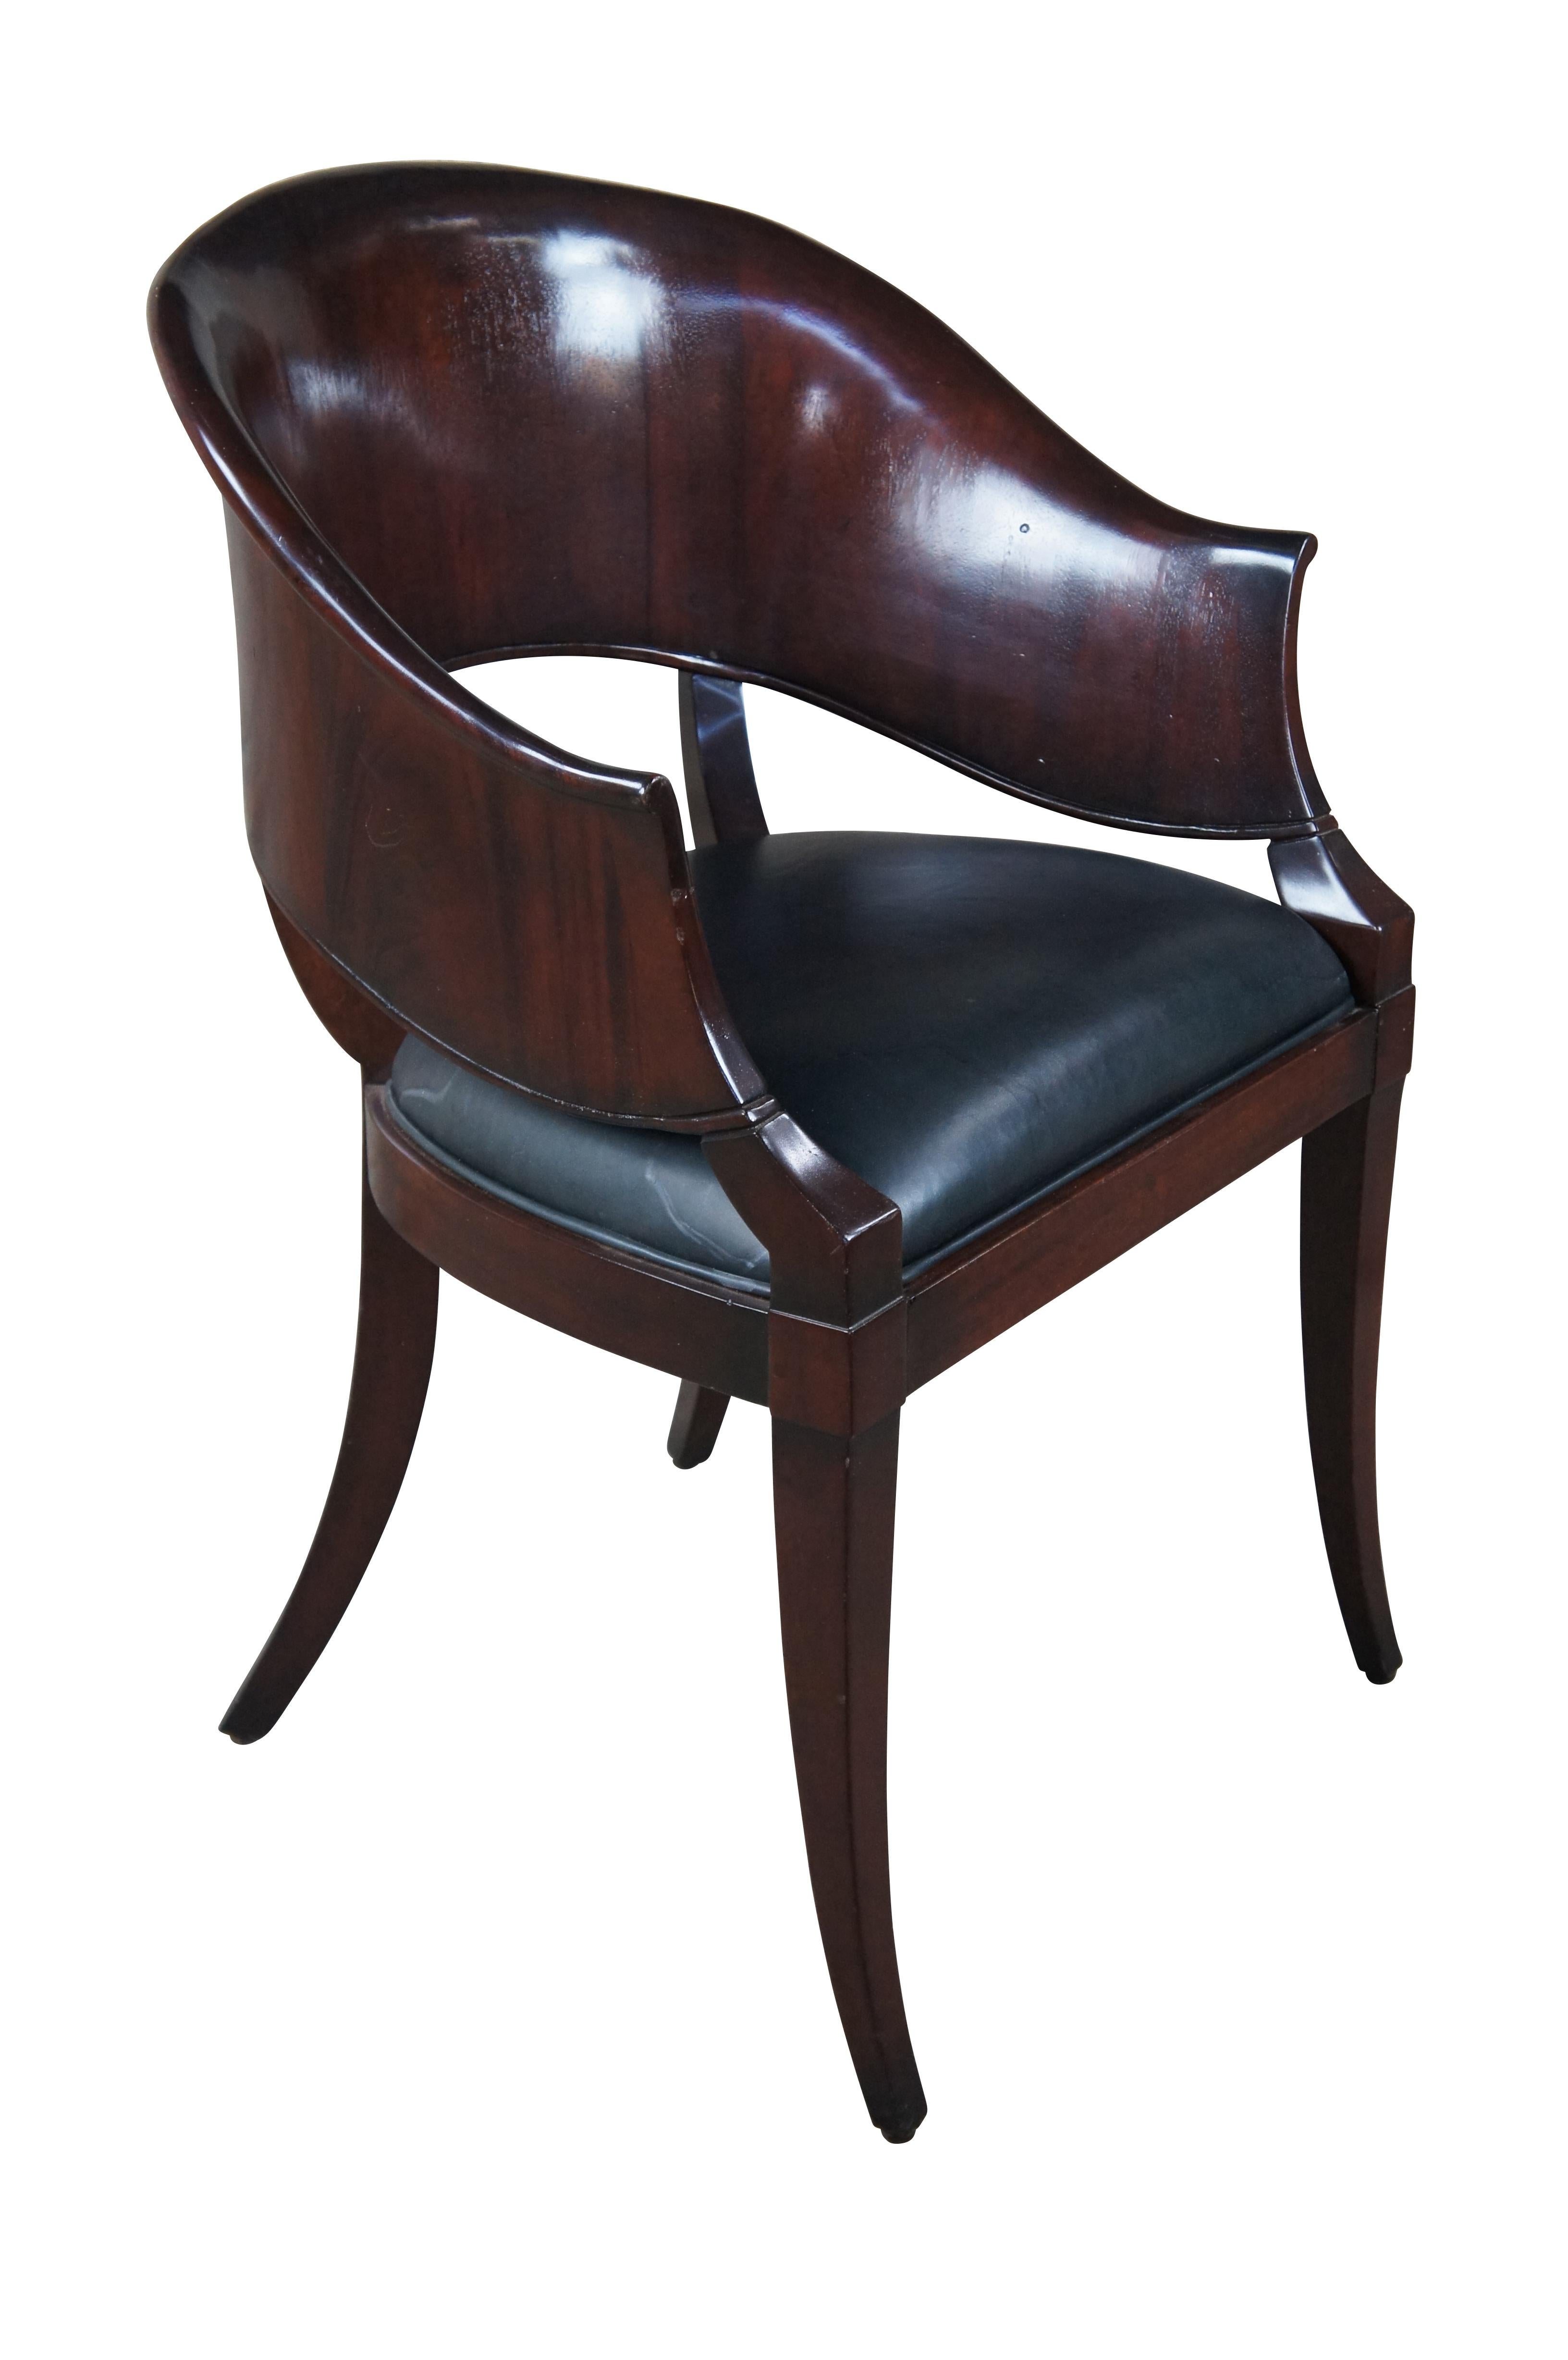 William Switzer Biedermeier French Art Deco Inspired Barrel Back Desk Arm Chair In Good Condition For Sale In Dayton, OH